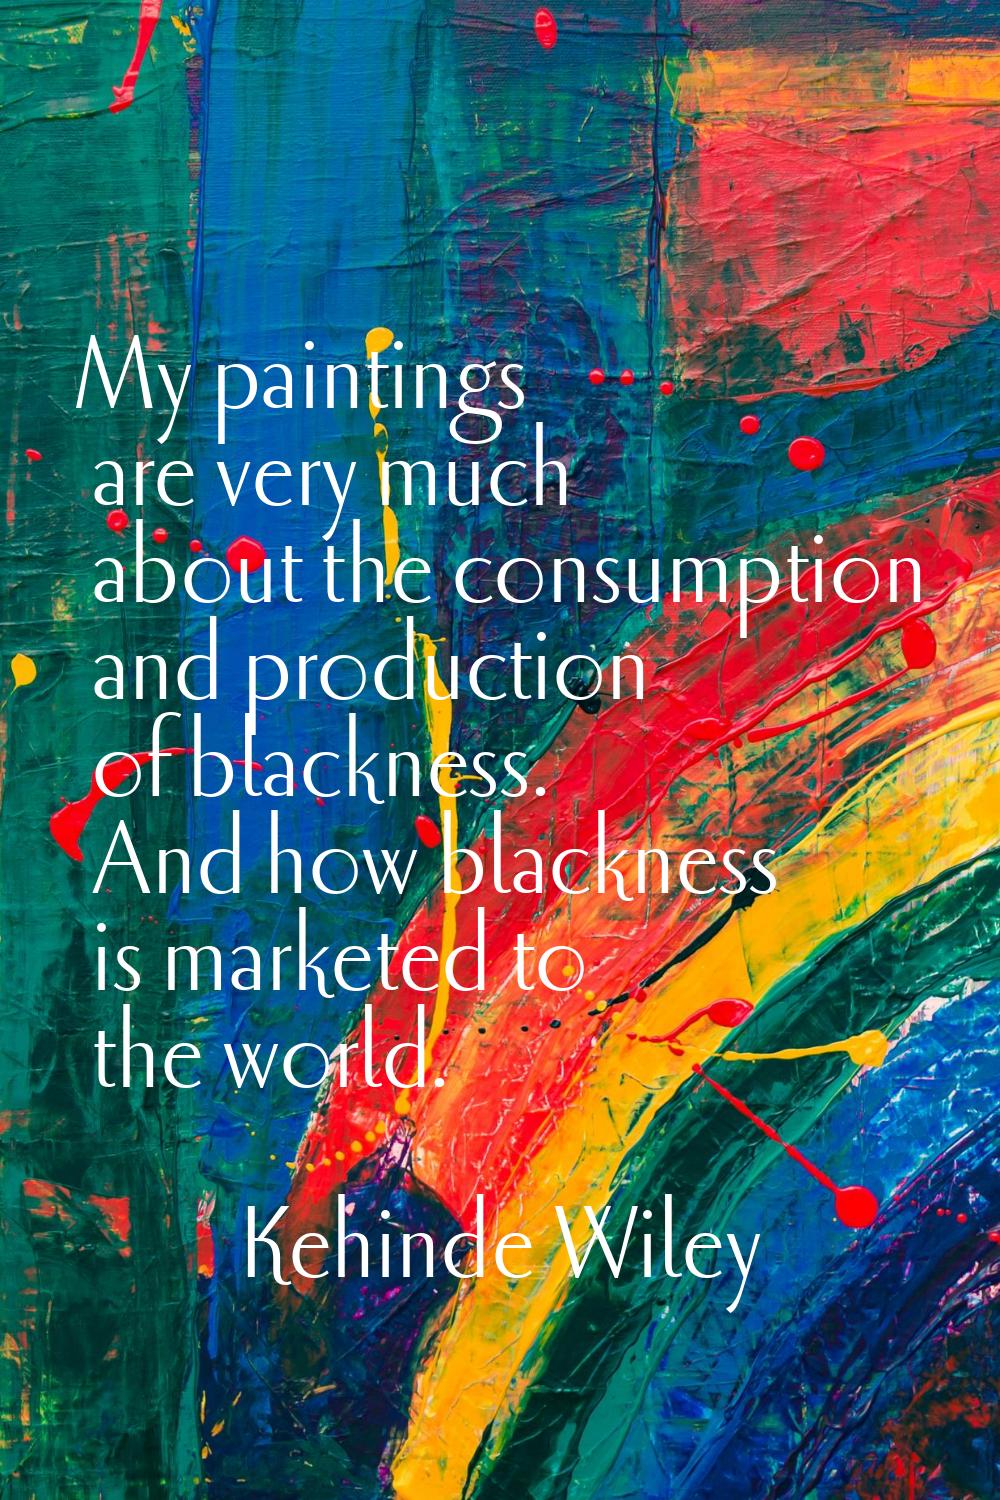 My paintings are very much about the consumption and production of blackness. And how blackness is 